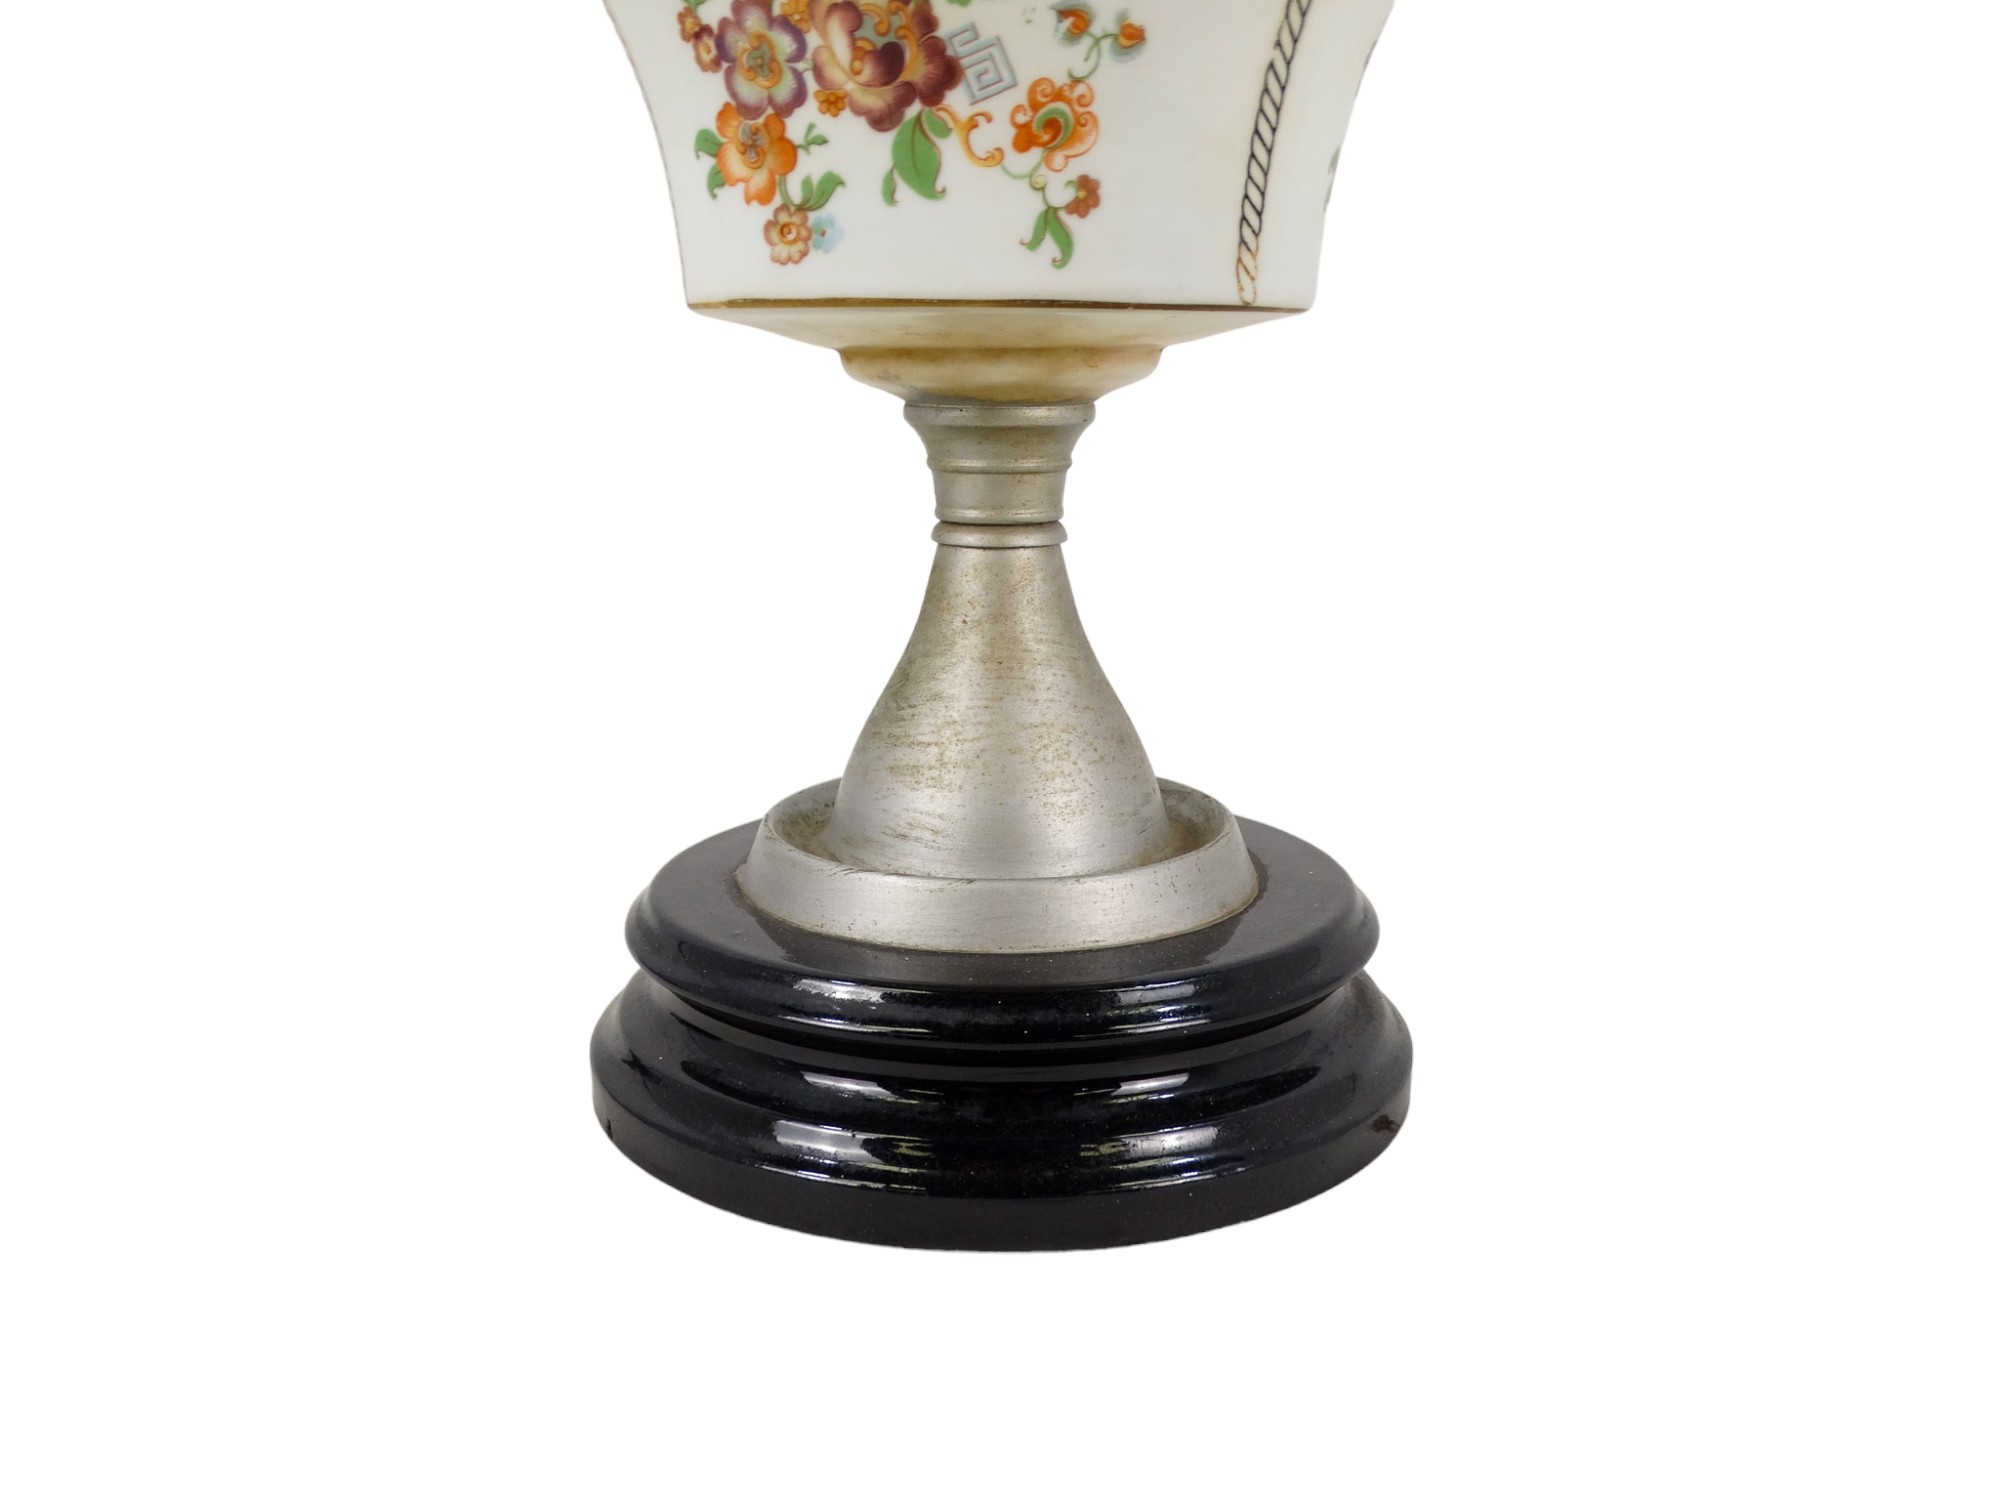 A late Victorian oil lamp - the milk glass reservoir decorated with flowers and an etched glass - Image 6 of 8